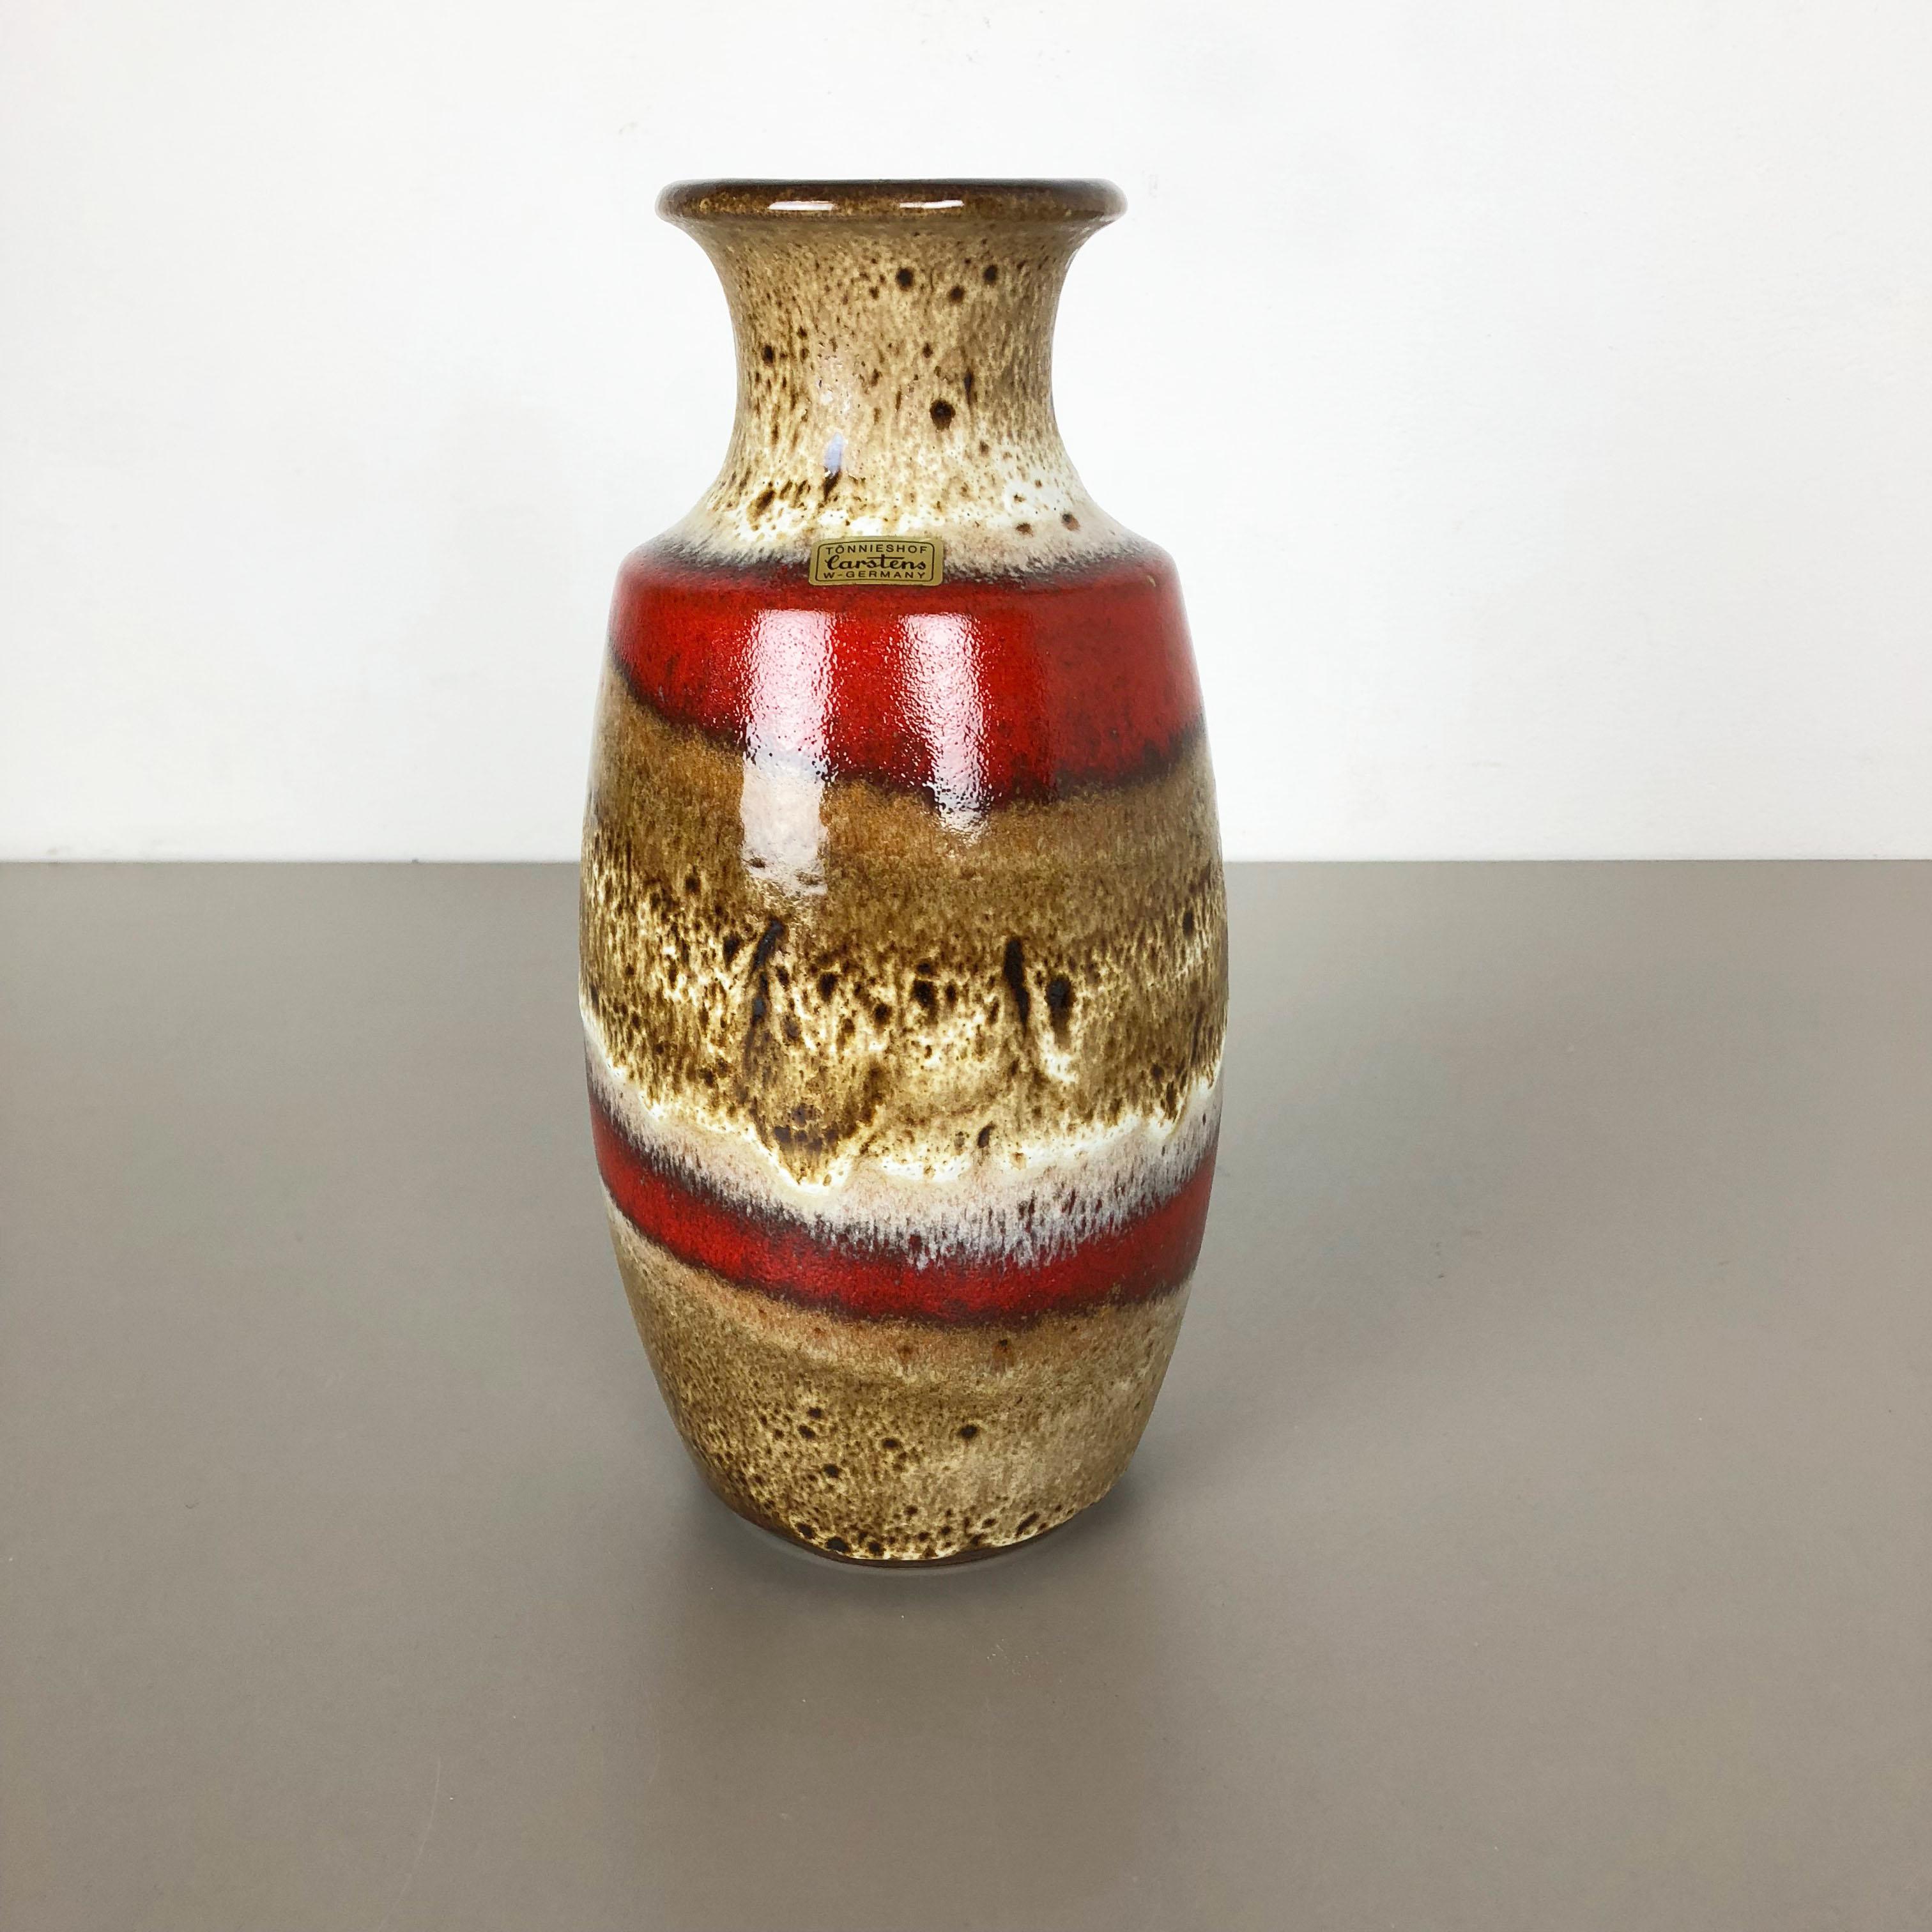 Article:

Ceramic pottery vase


Origin:

Germany


Designer:

Heinz Siery


Producer:

Carstens Tönnieshof, Germany


Decade:

1970s


This original vintage Pottery Object was designed by Heinz Siery and produced by Cartens